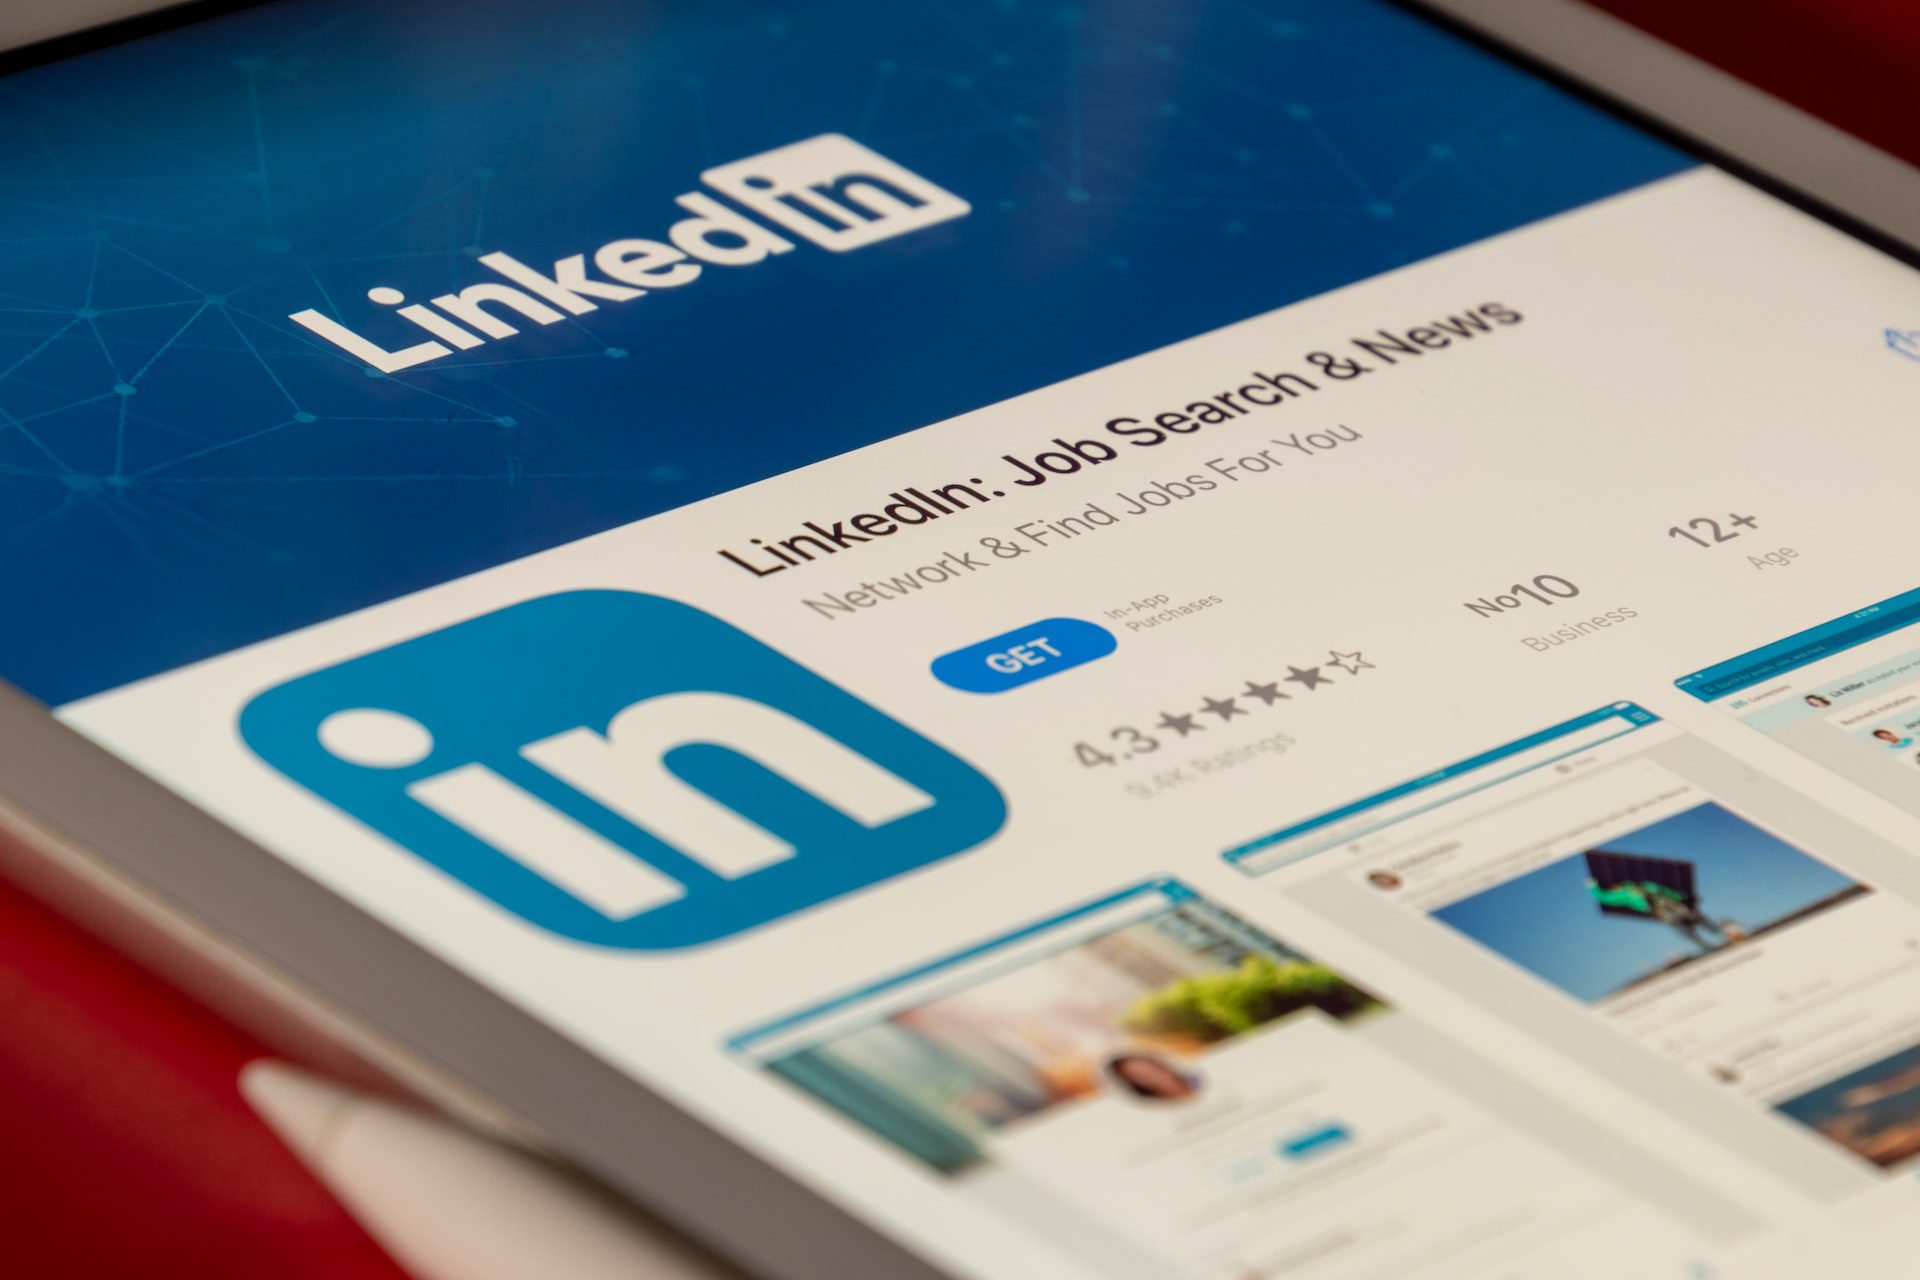 StrategyDriven Online Marketing and Website Development Article, Reasons Why You Should Get A LinkedIn Marketing Strategy Done